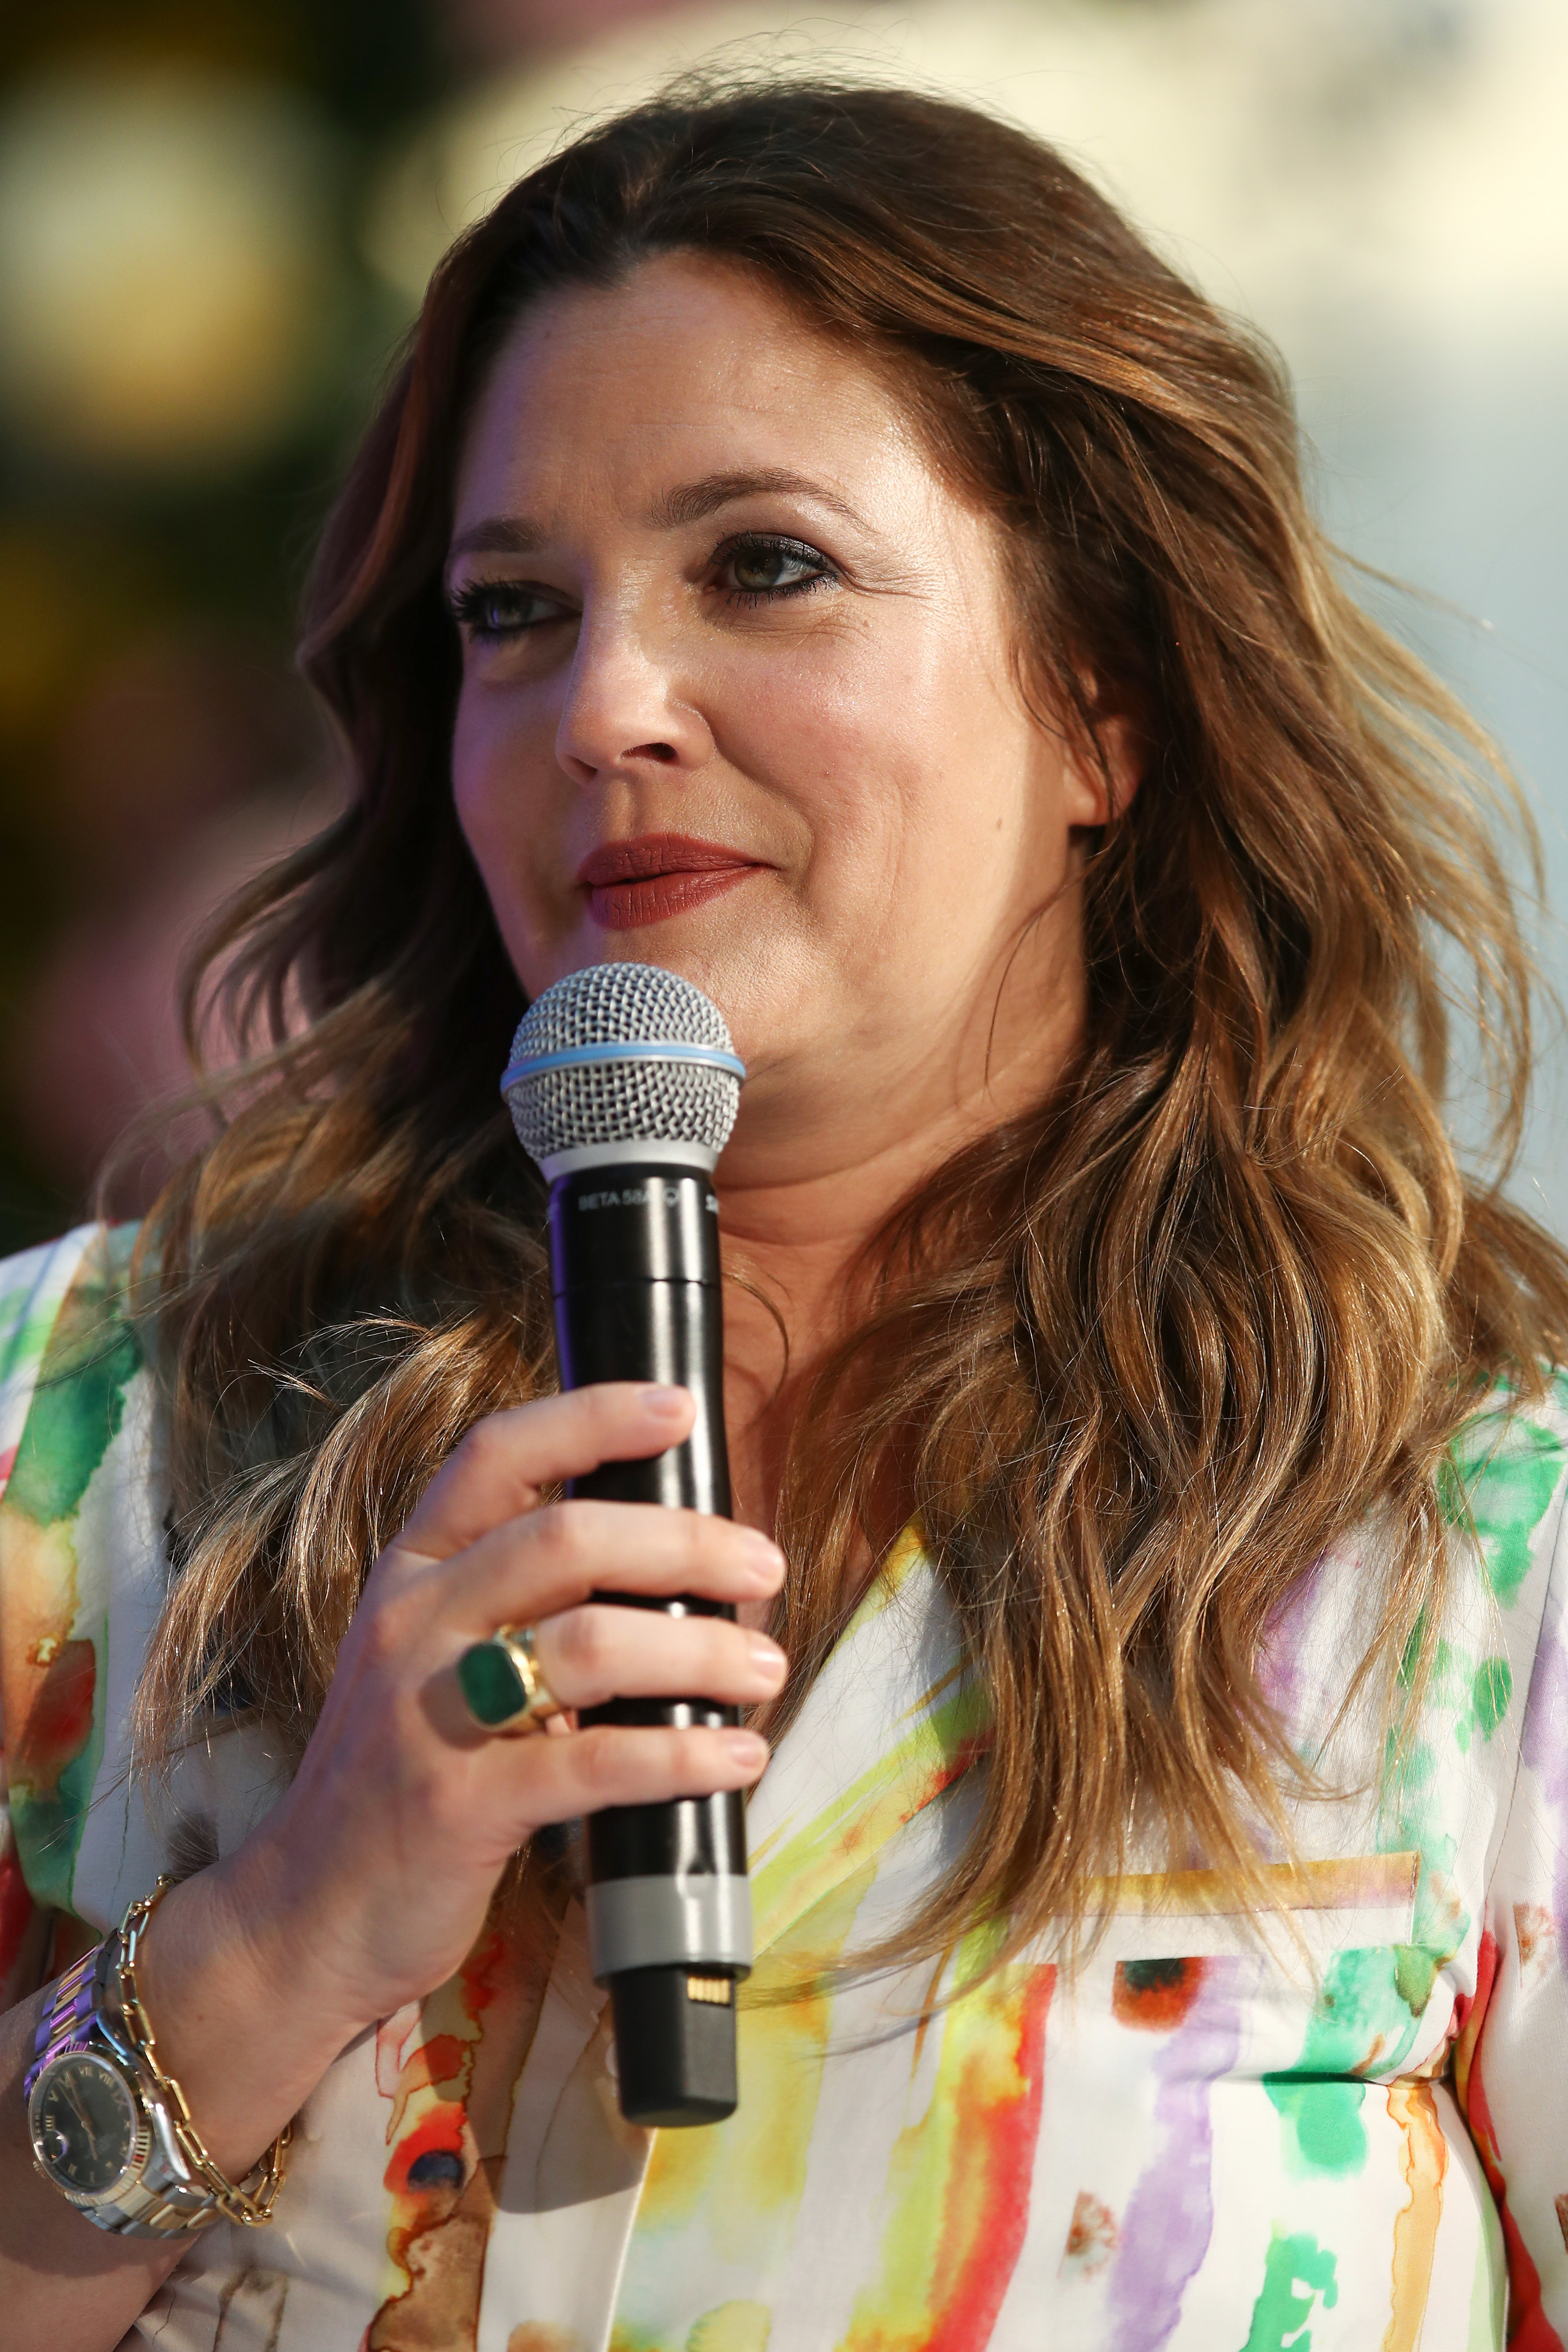 Closeup of Drew Barrymore holding up a microphone